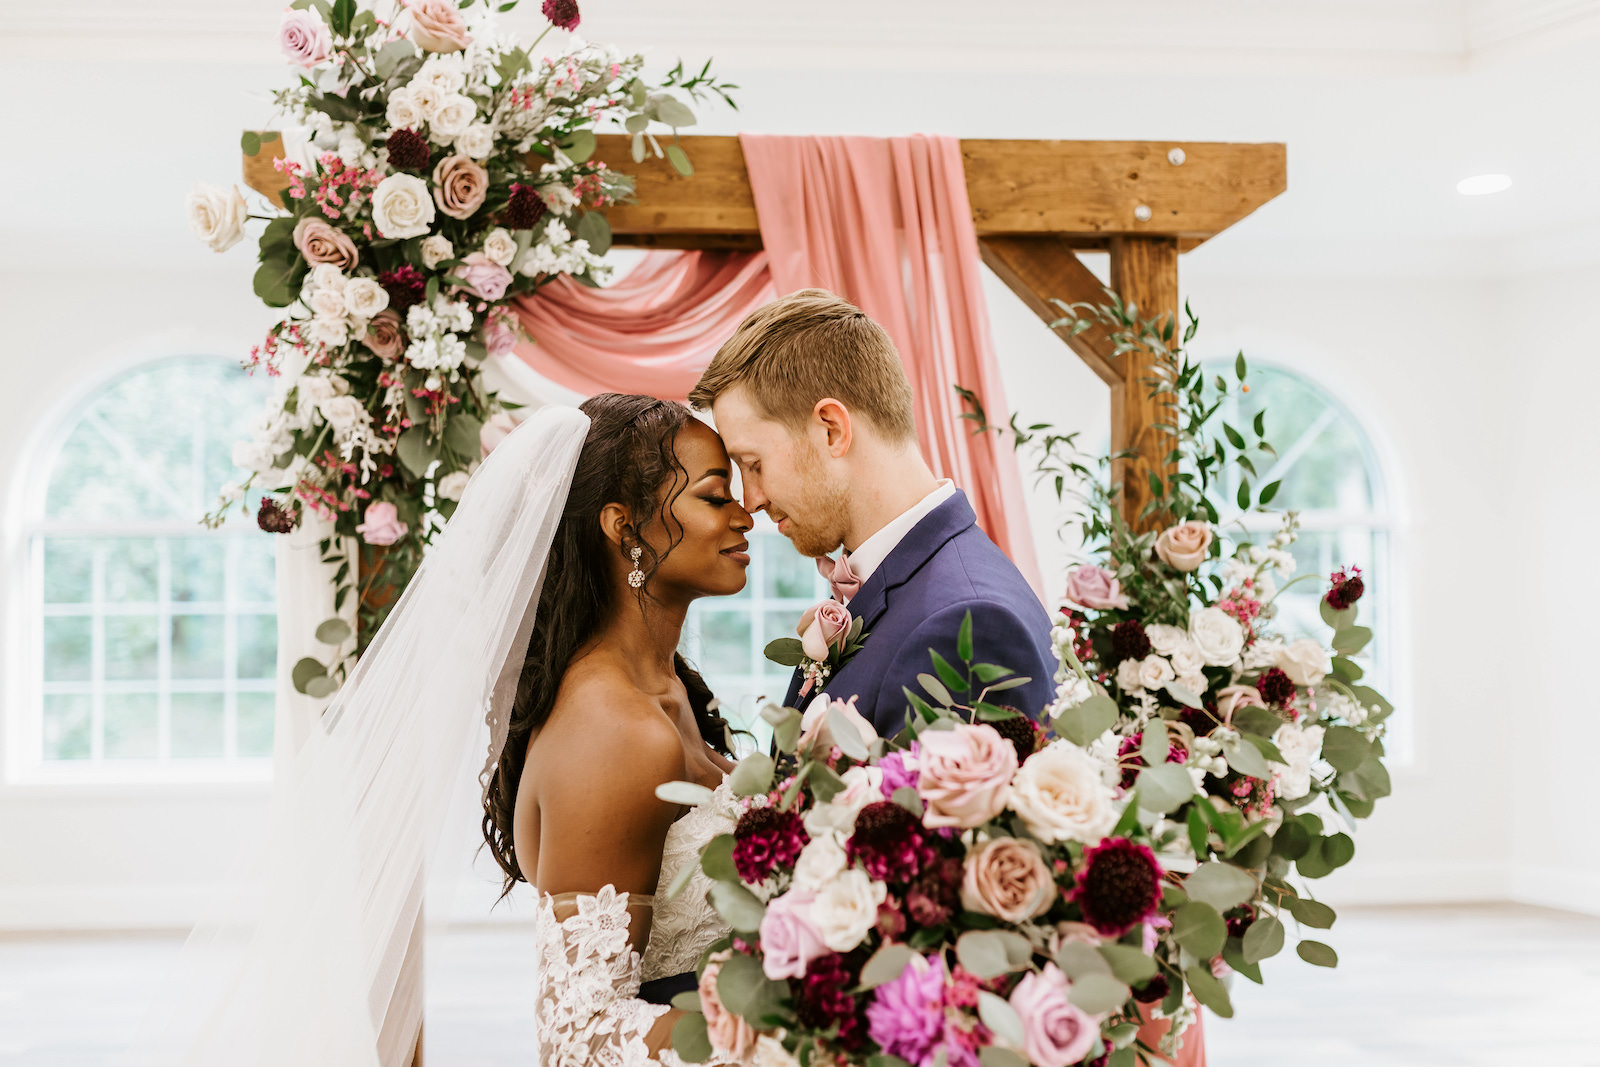 Bride and Groom Indoor Church Portrait at St. Pete Wedding Venue Harborside Chapel | Wood Arch with Draping and Natural Floral Arrangement Swag with Pink and White Roses and Eucalyptus Greenery | Lace and Tulle Ballgown Bridal Gown Wedding Dress with Illusion Lace Long Sleeves | Navy Groom Suit | Bridal Bouquet with Ivory Pink and Burgundy Maroon Roses with Eucalyptus Greenery and Cascading Pink Velvet Ribbons